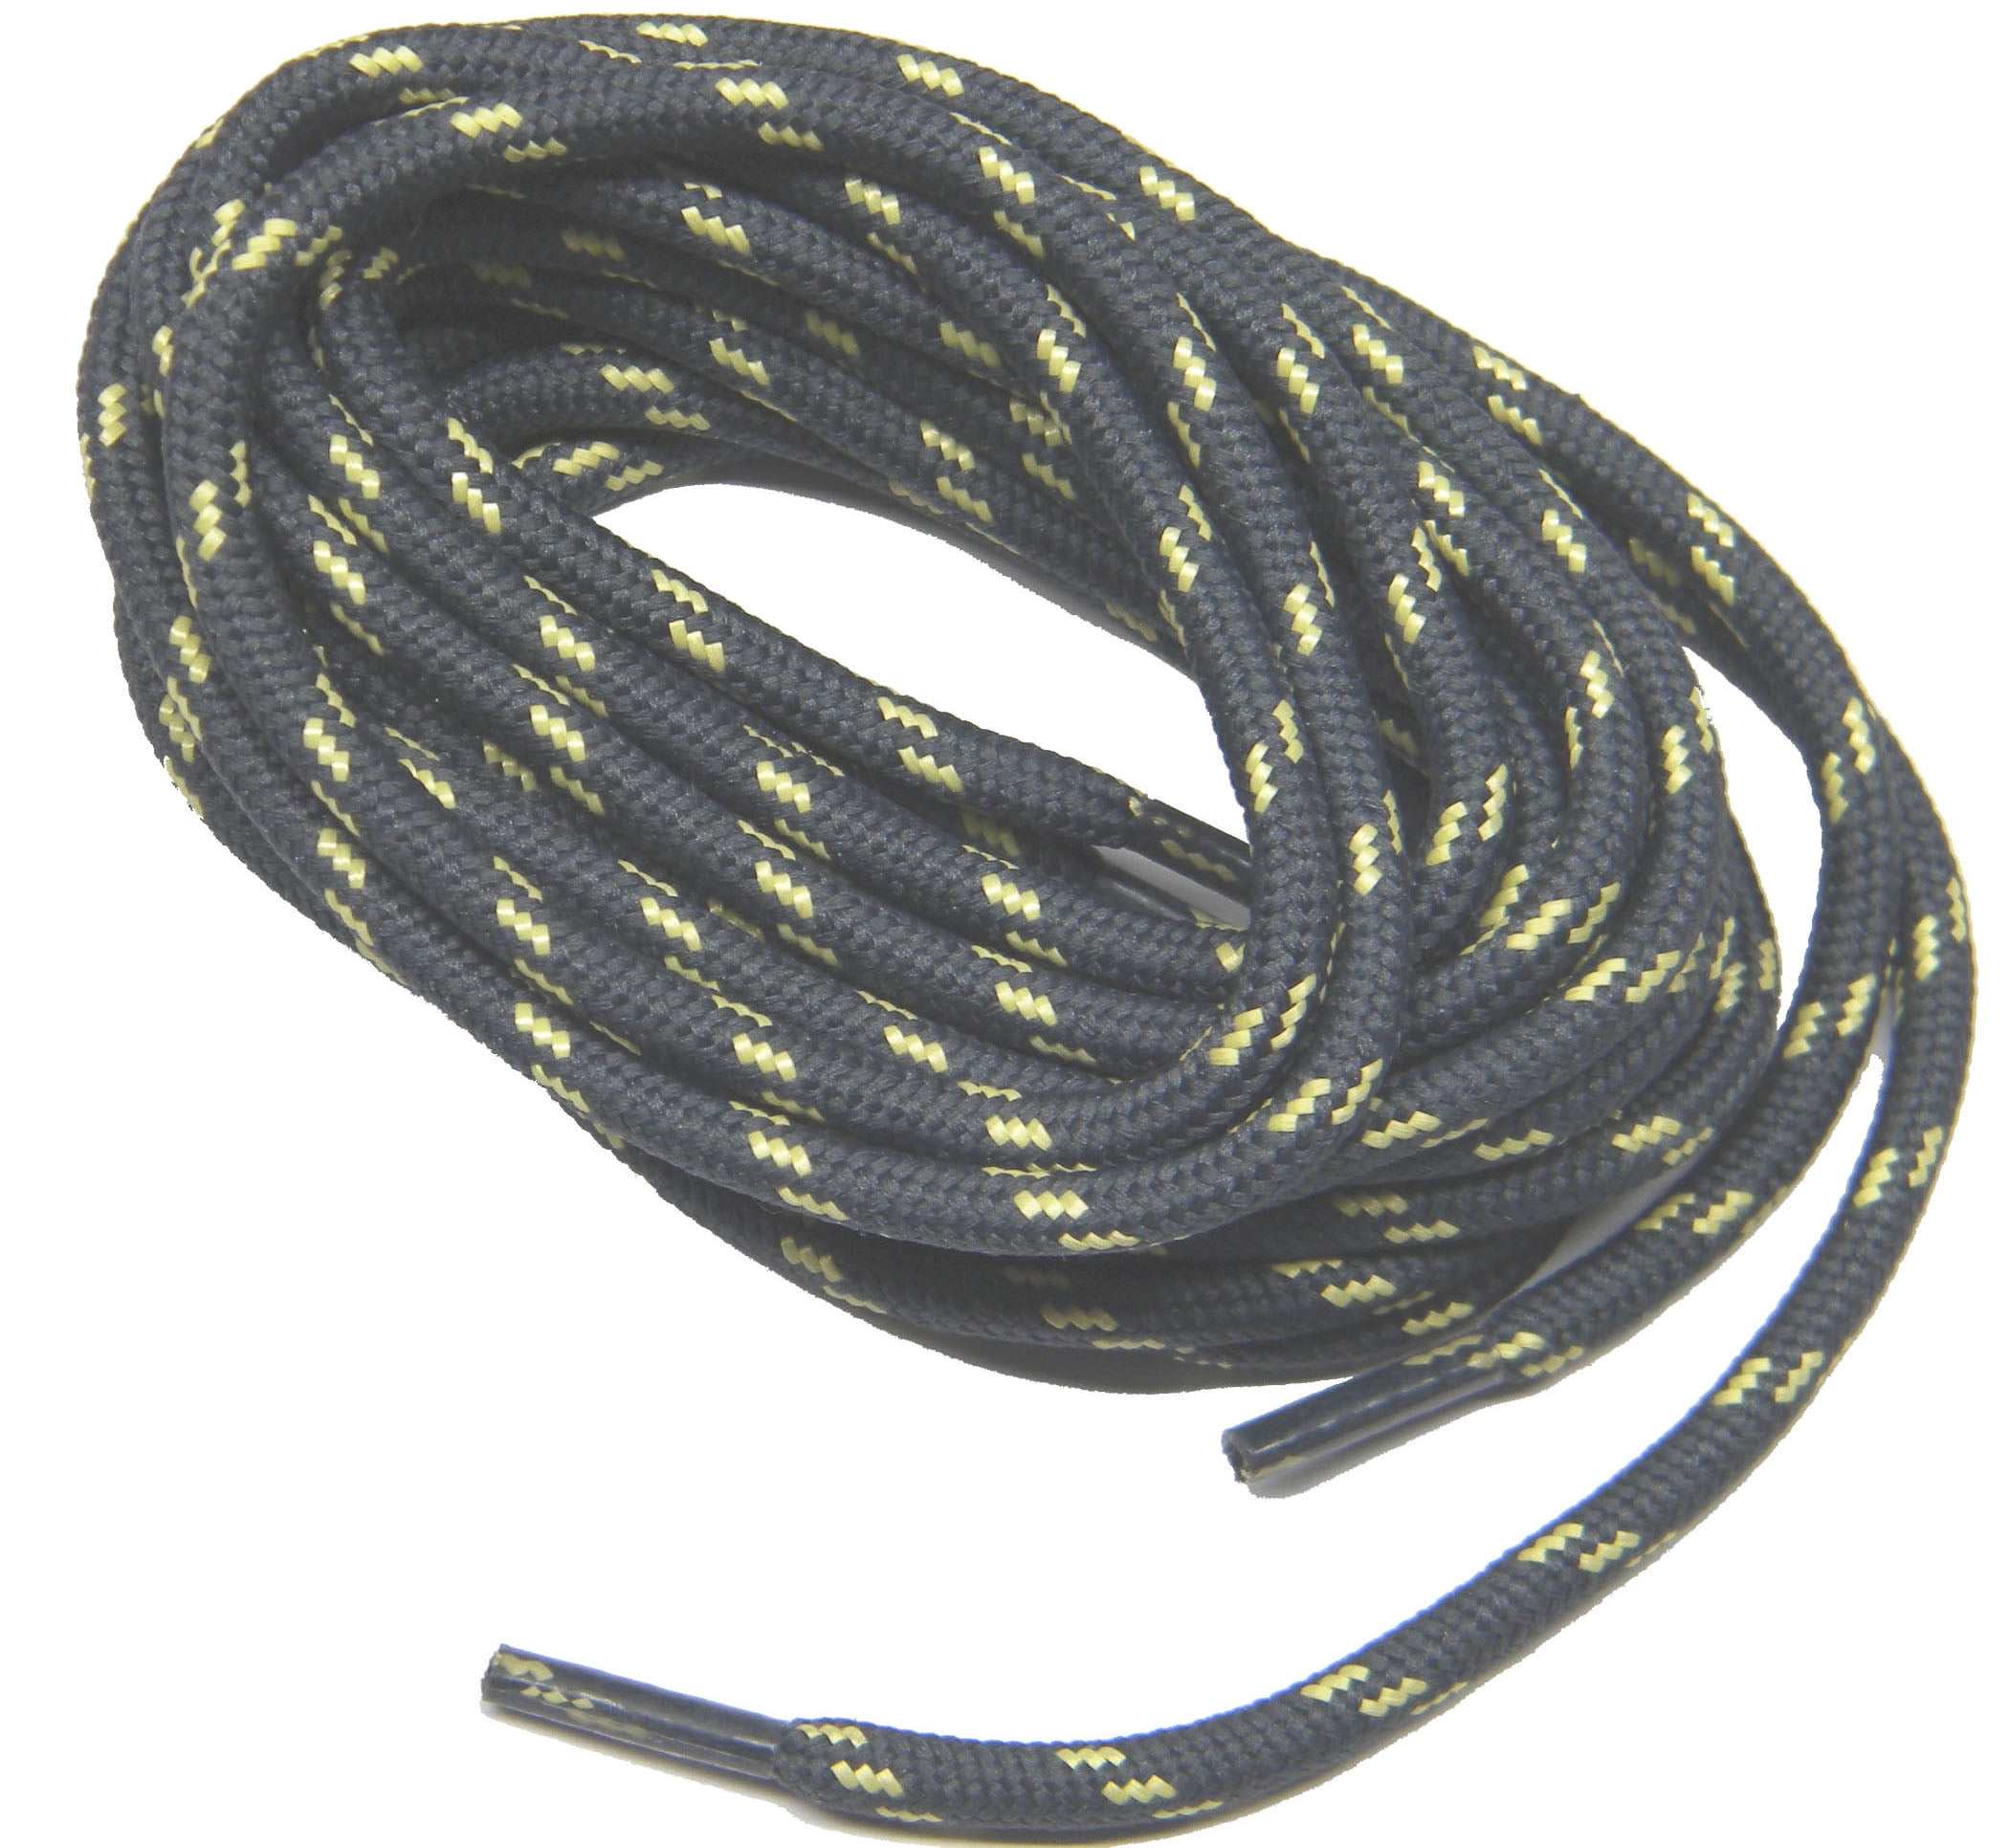 Heavy Duty Dark Storm Grey w/kevlar boot laces shoelaces NEW 2 pair pack 